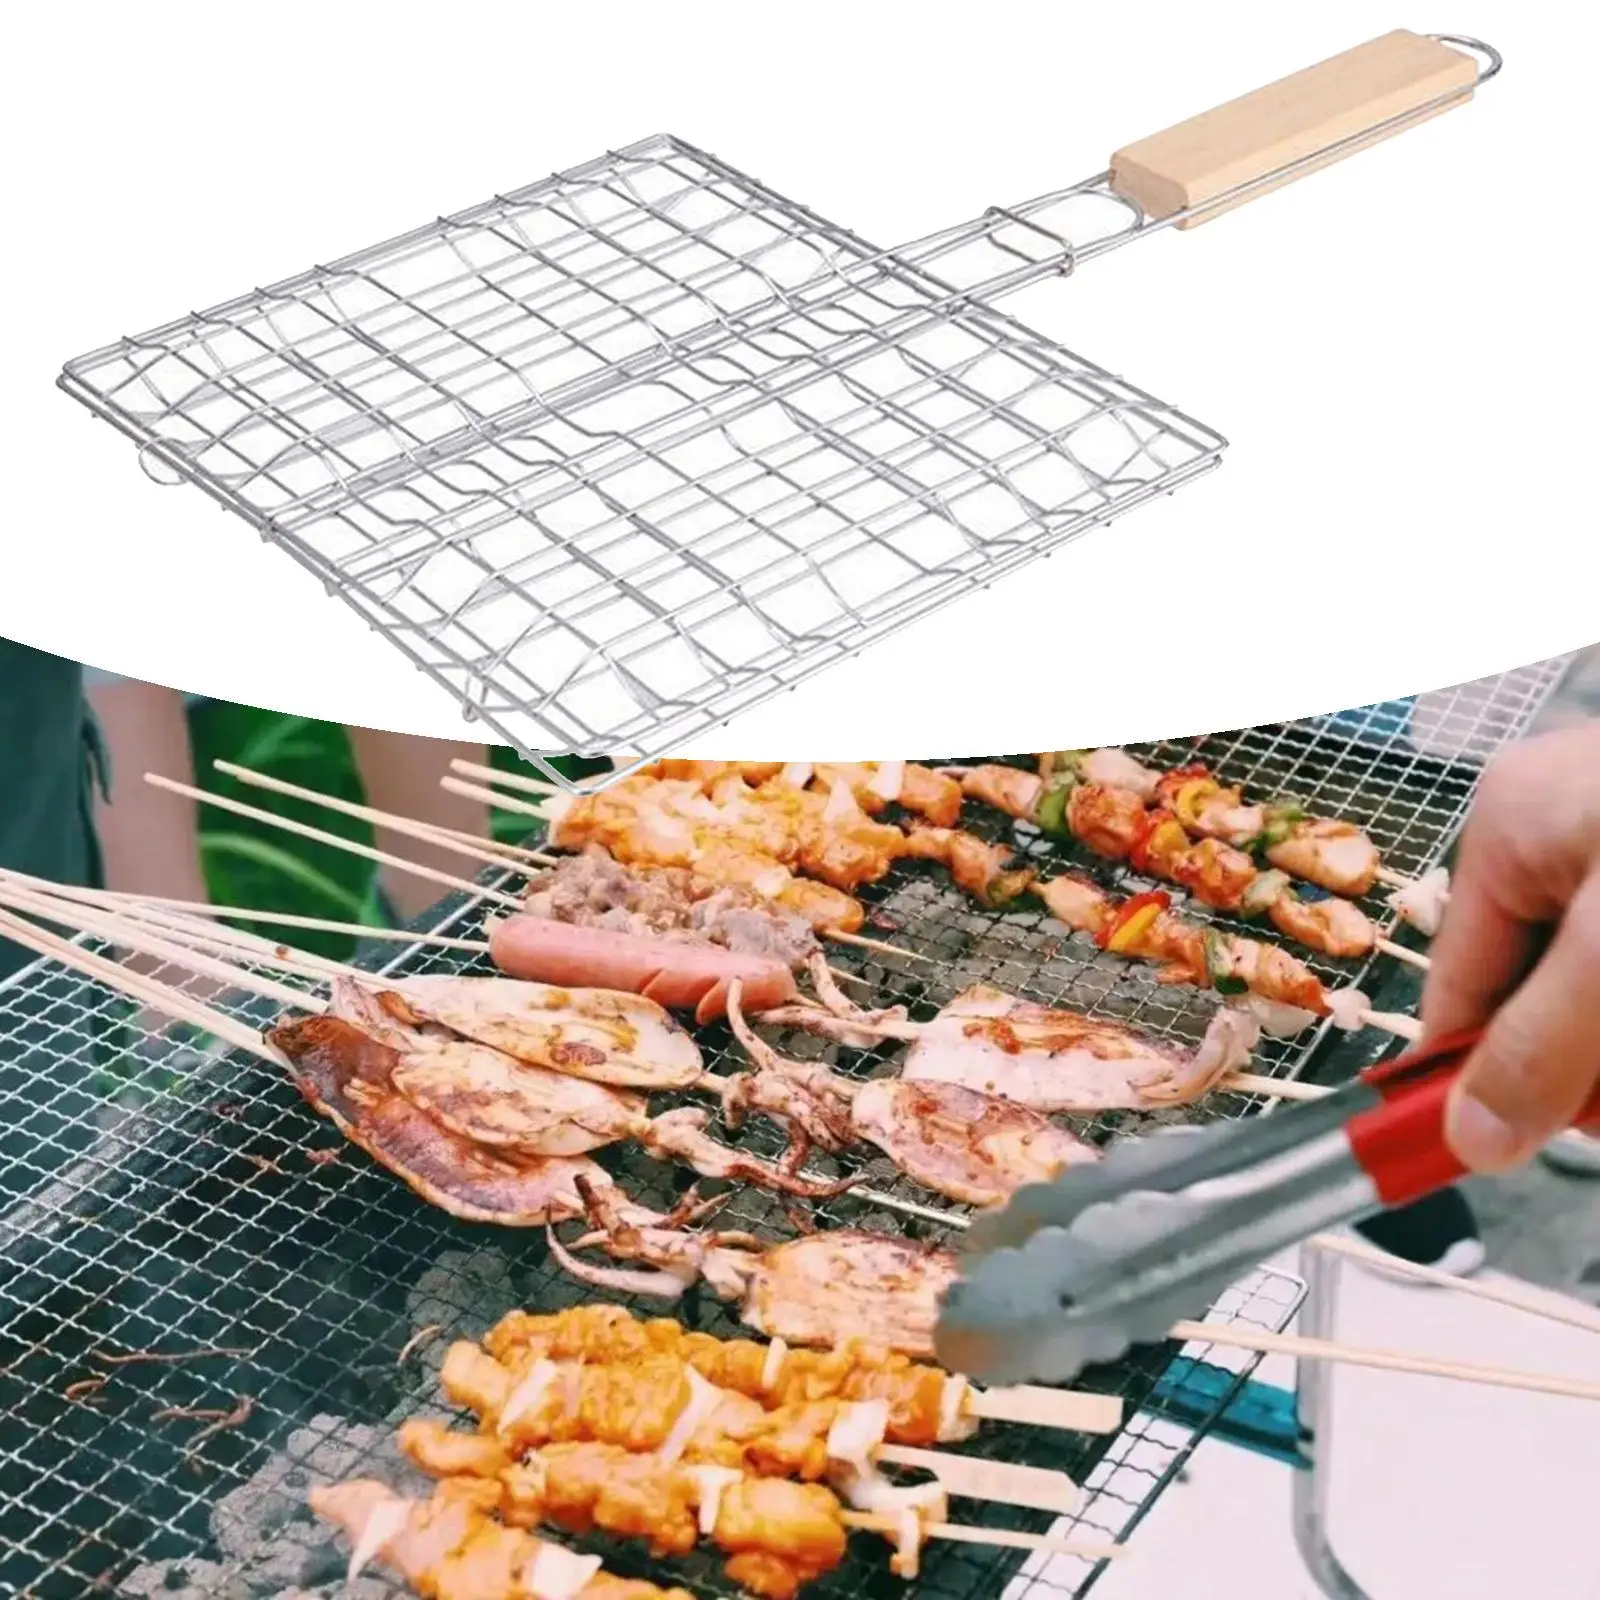  Grilling Basket Vegetables Foldable Grill Net High Temperature Resistance for Outdoor Barbecue Accessories